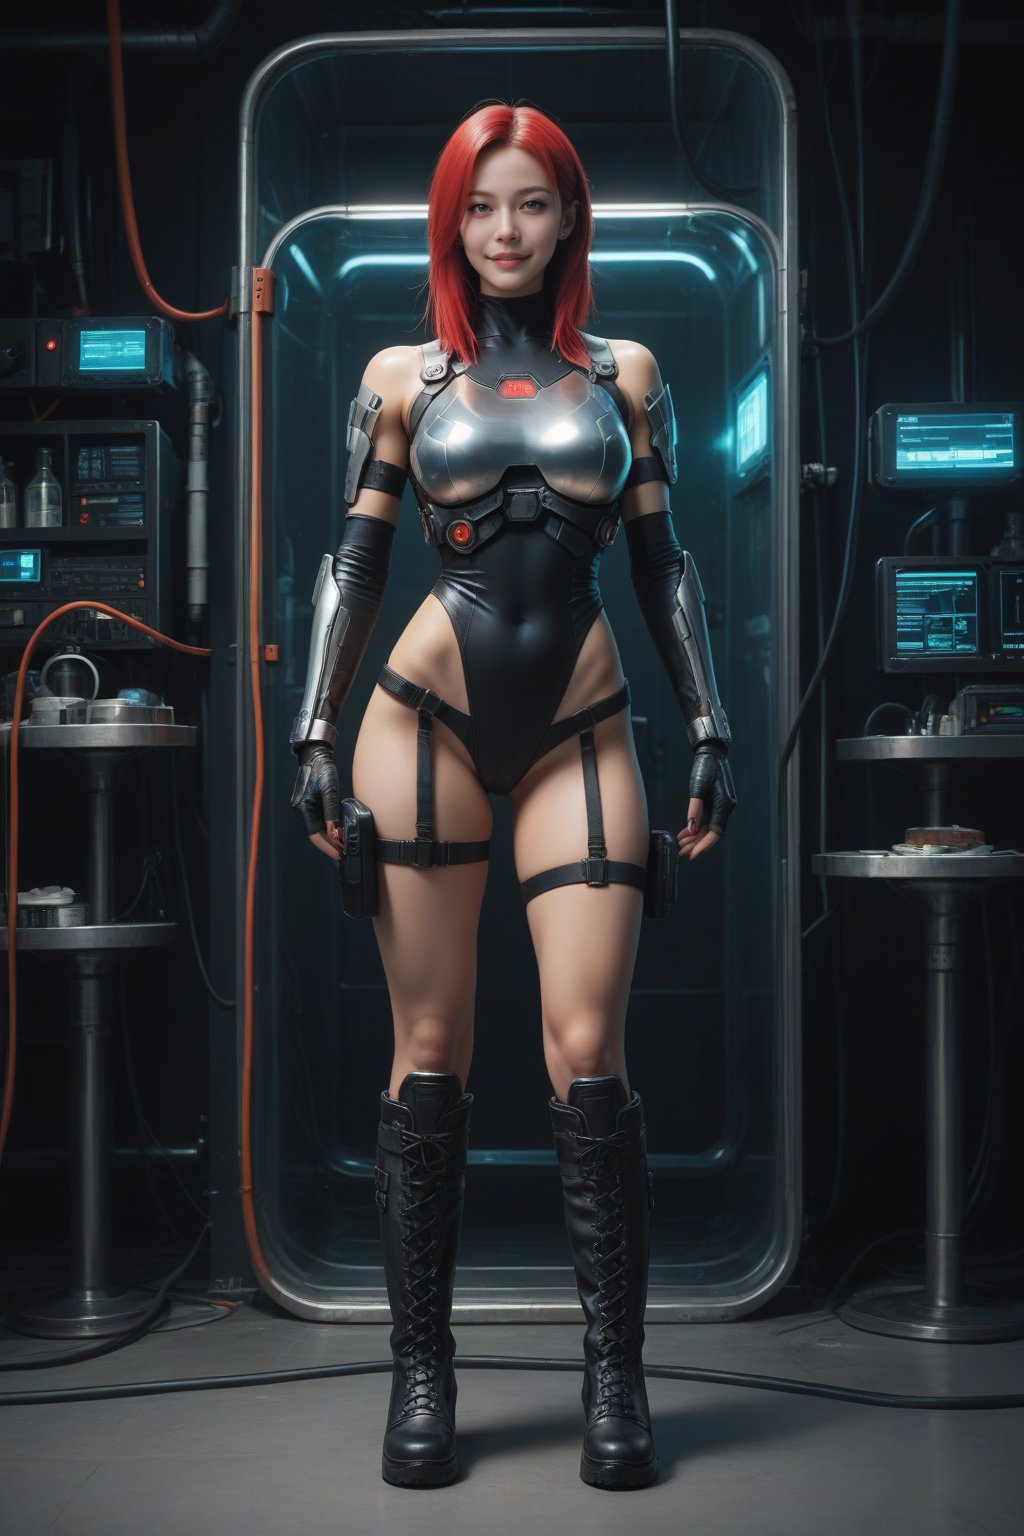 score_9, score_8_up, score_7_up, masterpiece, best quality,
BREAK
realistic,
cyberpunk girl, long red hair, nano tattoos, chrome armor, digital interface gloves, combat boots,
mysterious lab background, virtual reality rigs, cryogenic storage units, floating data orbs, diagnostic screens, neon pipes